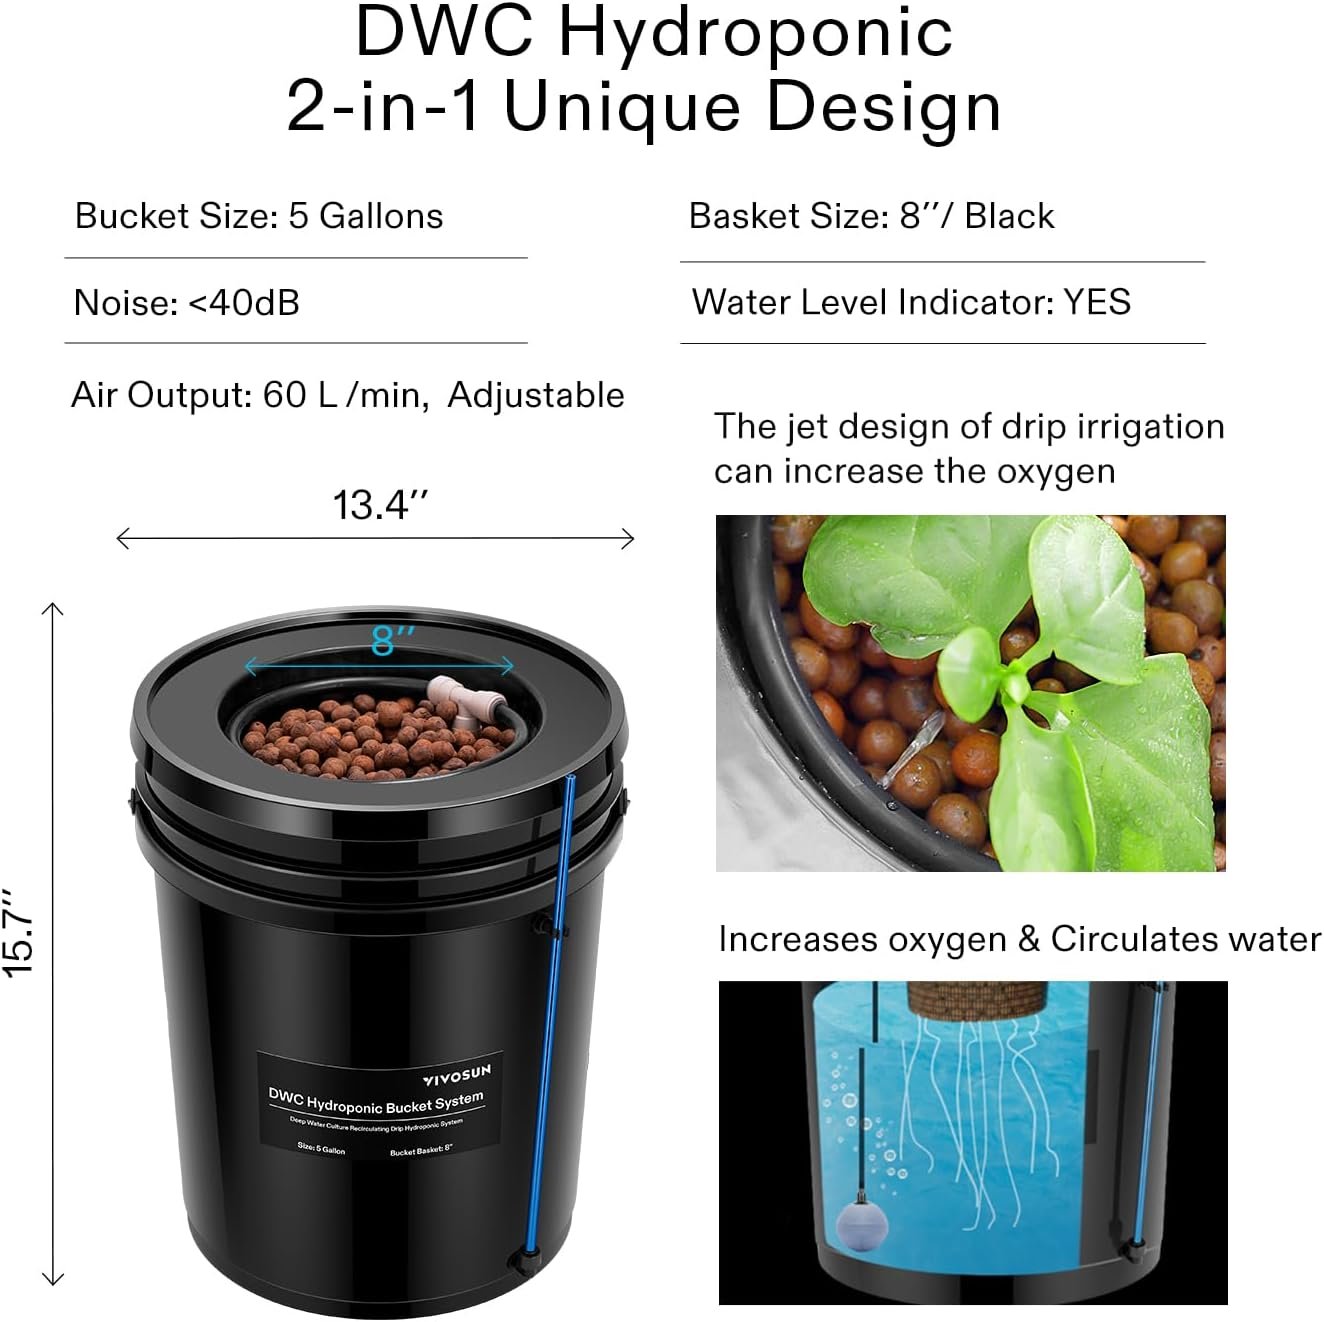 VIVOSUN DWC Hydroponics Grow System with Top Drip Kit, 5-Gallon Deep Water Culture, Recirculating Drip Garden System with Multi-Purpose Air Hose, Air Pump, and Air Stone (4 Buckets + Top Drip Kit)